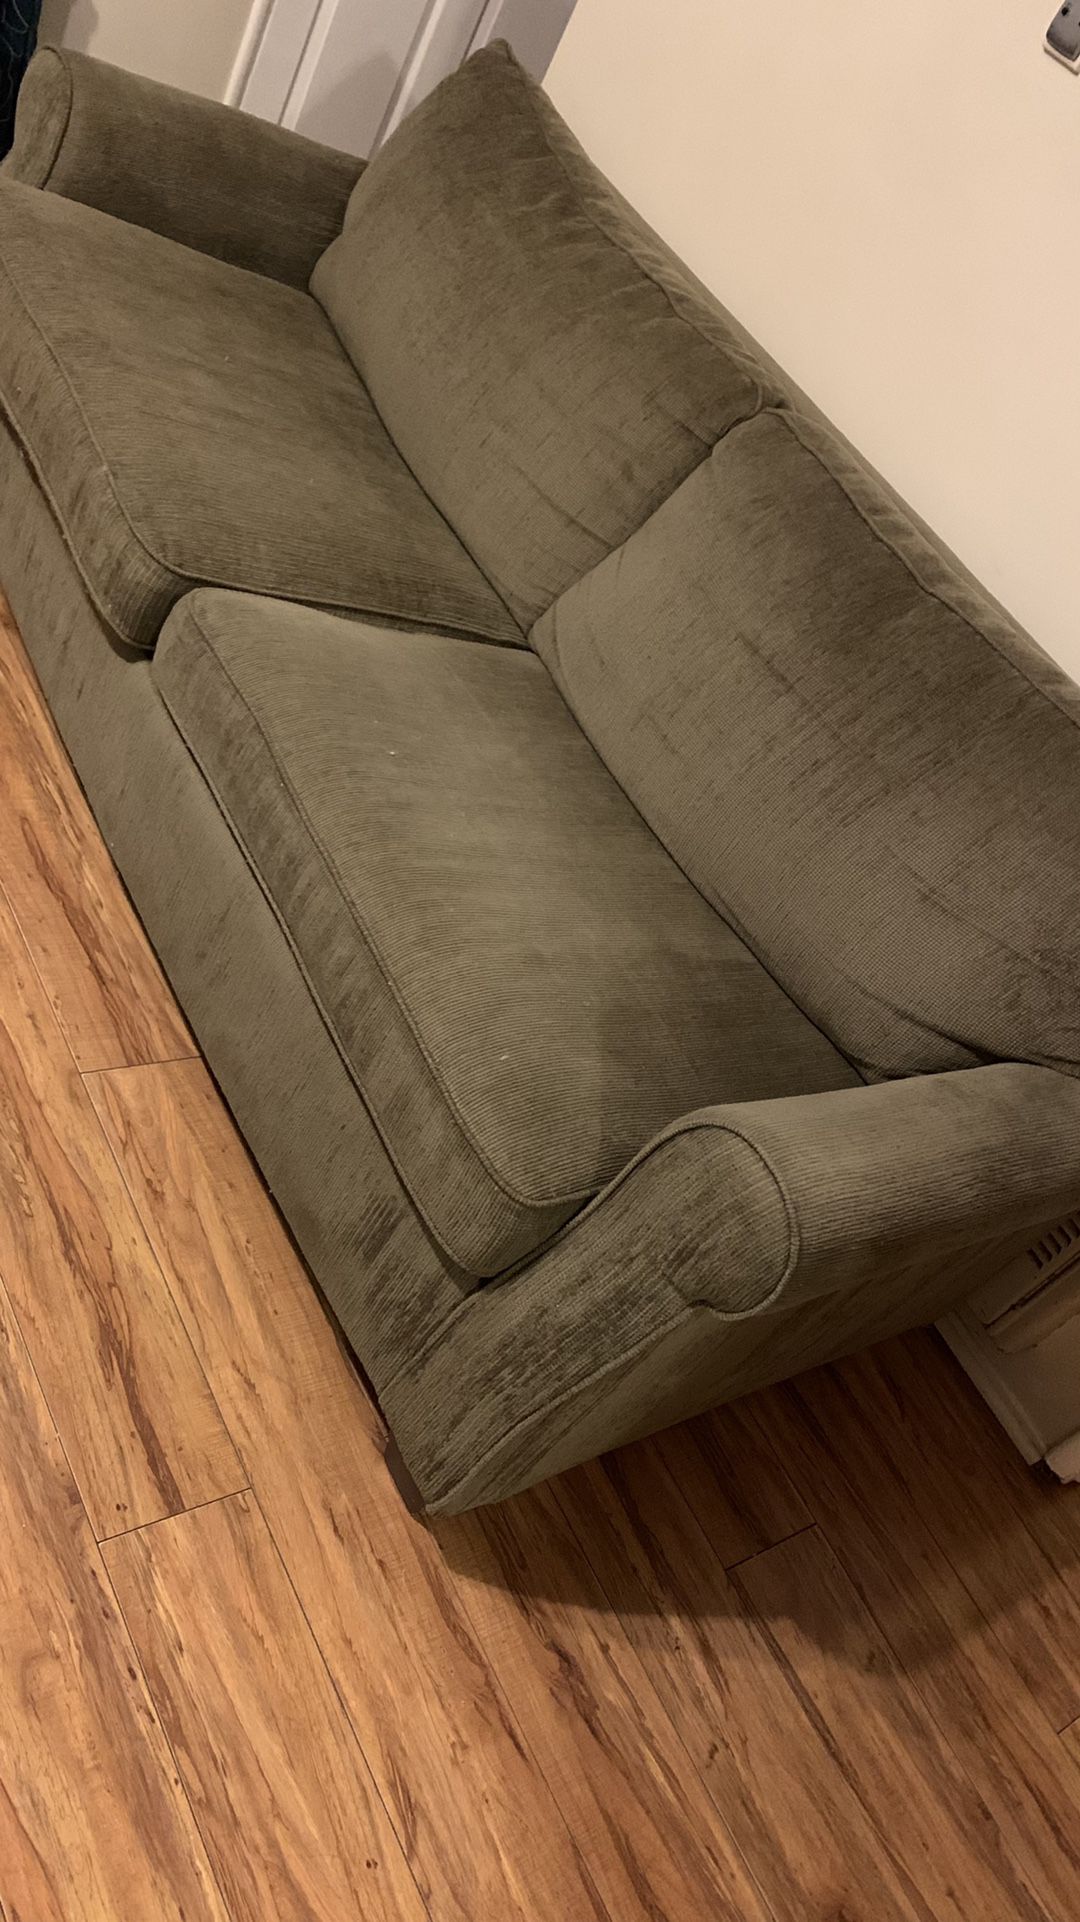 Sofa Bed Good Condition 